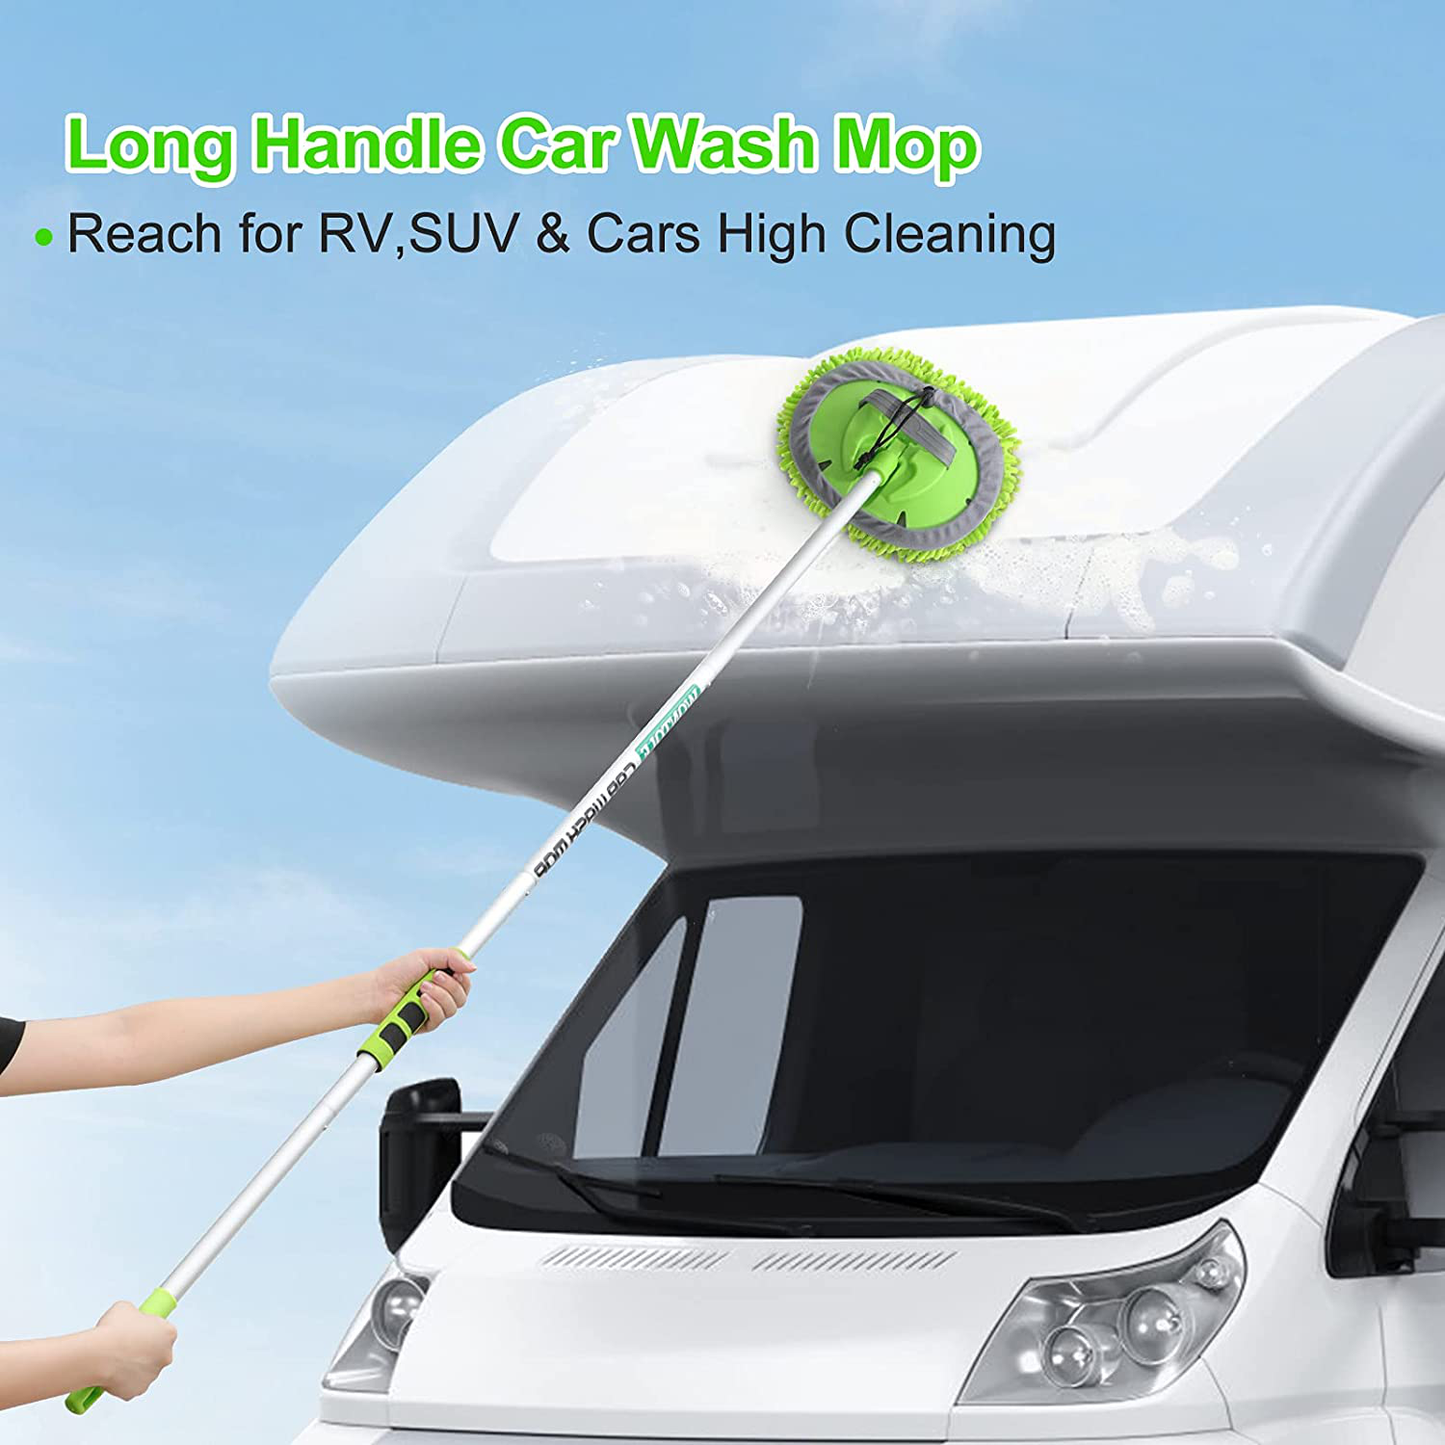 Wontolf 62'' Car Wash Mop Brush Kits Mitt with Long Handle Windshield Window Squeegee Car Duster Long Handle Microfiber Towels Cleaning Cloth Car Washing Supplies for RV SUV Cars 9PCS